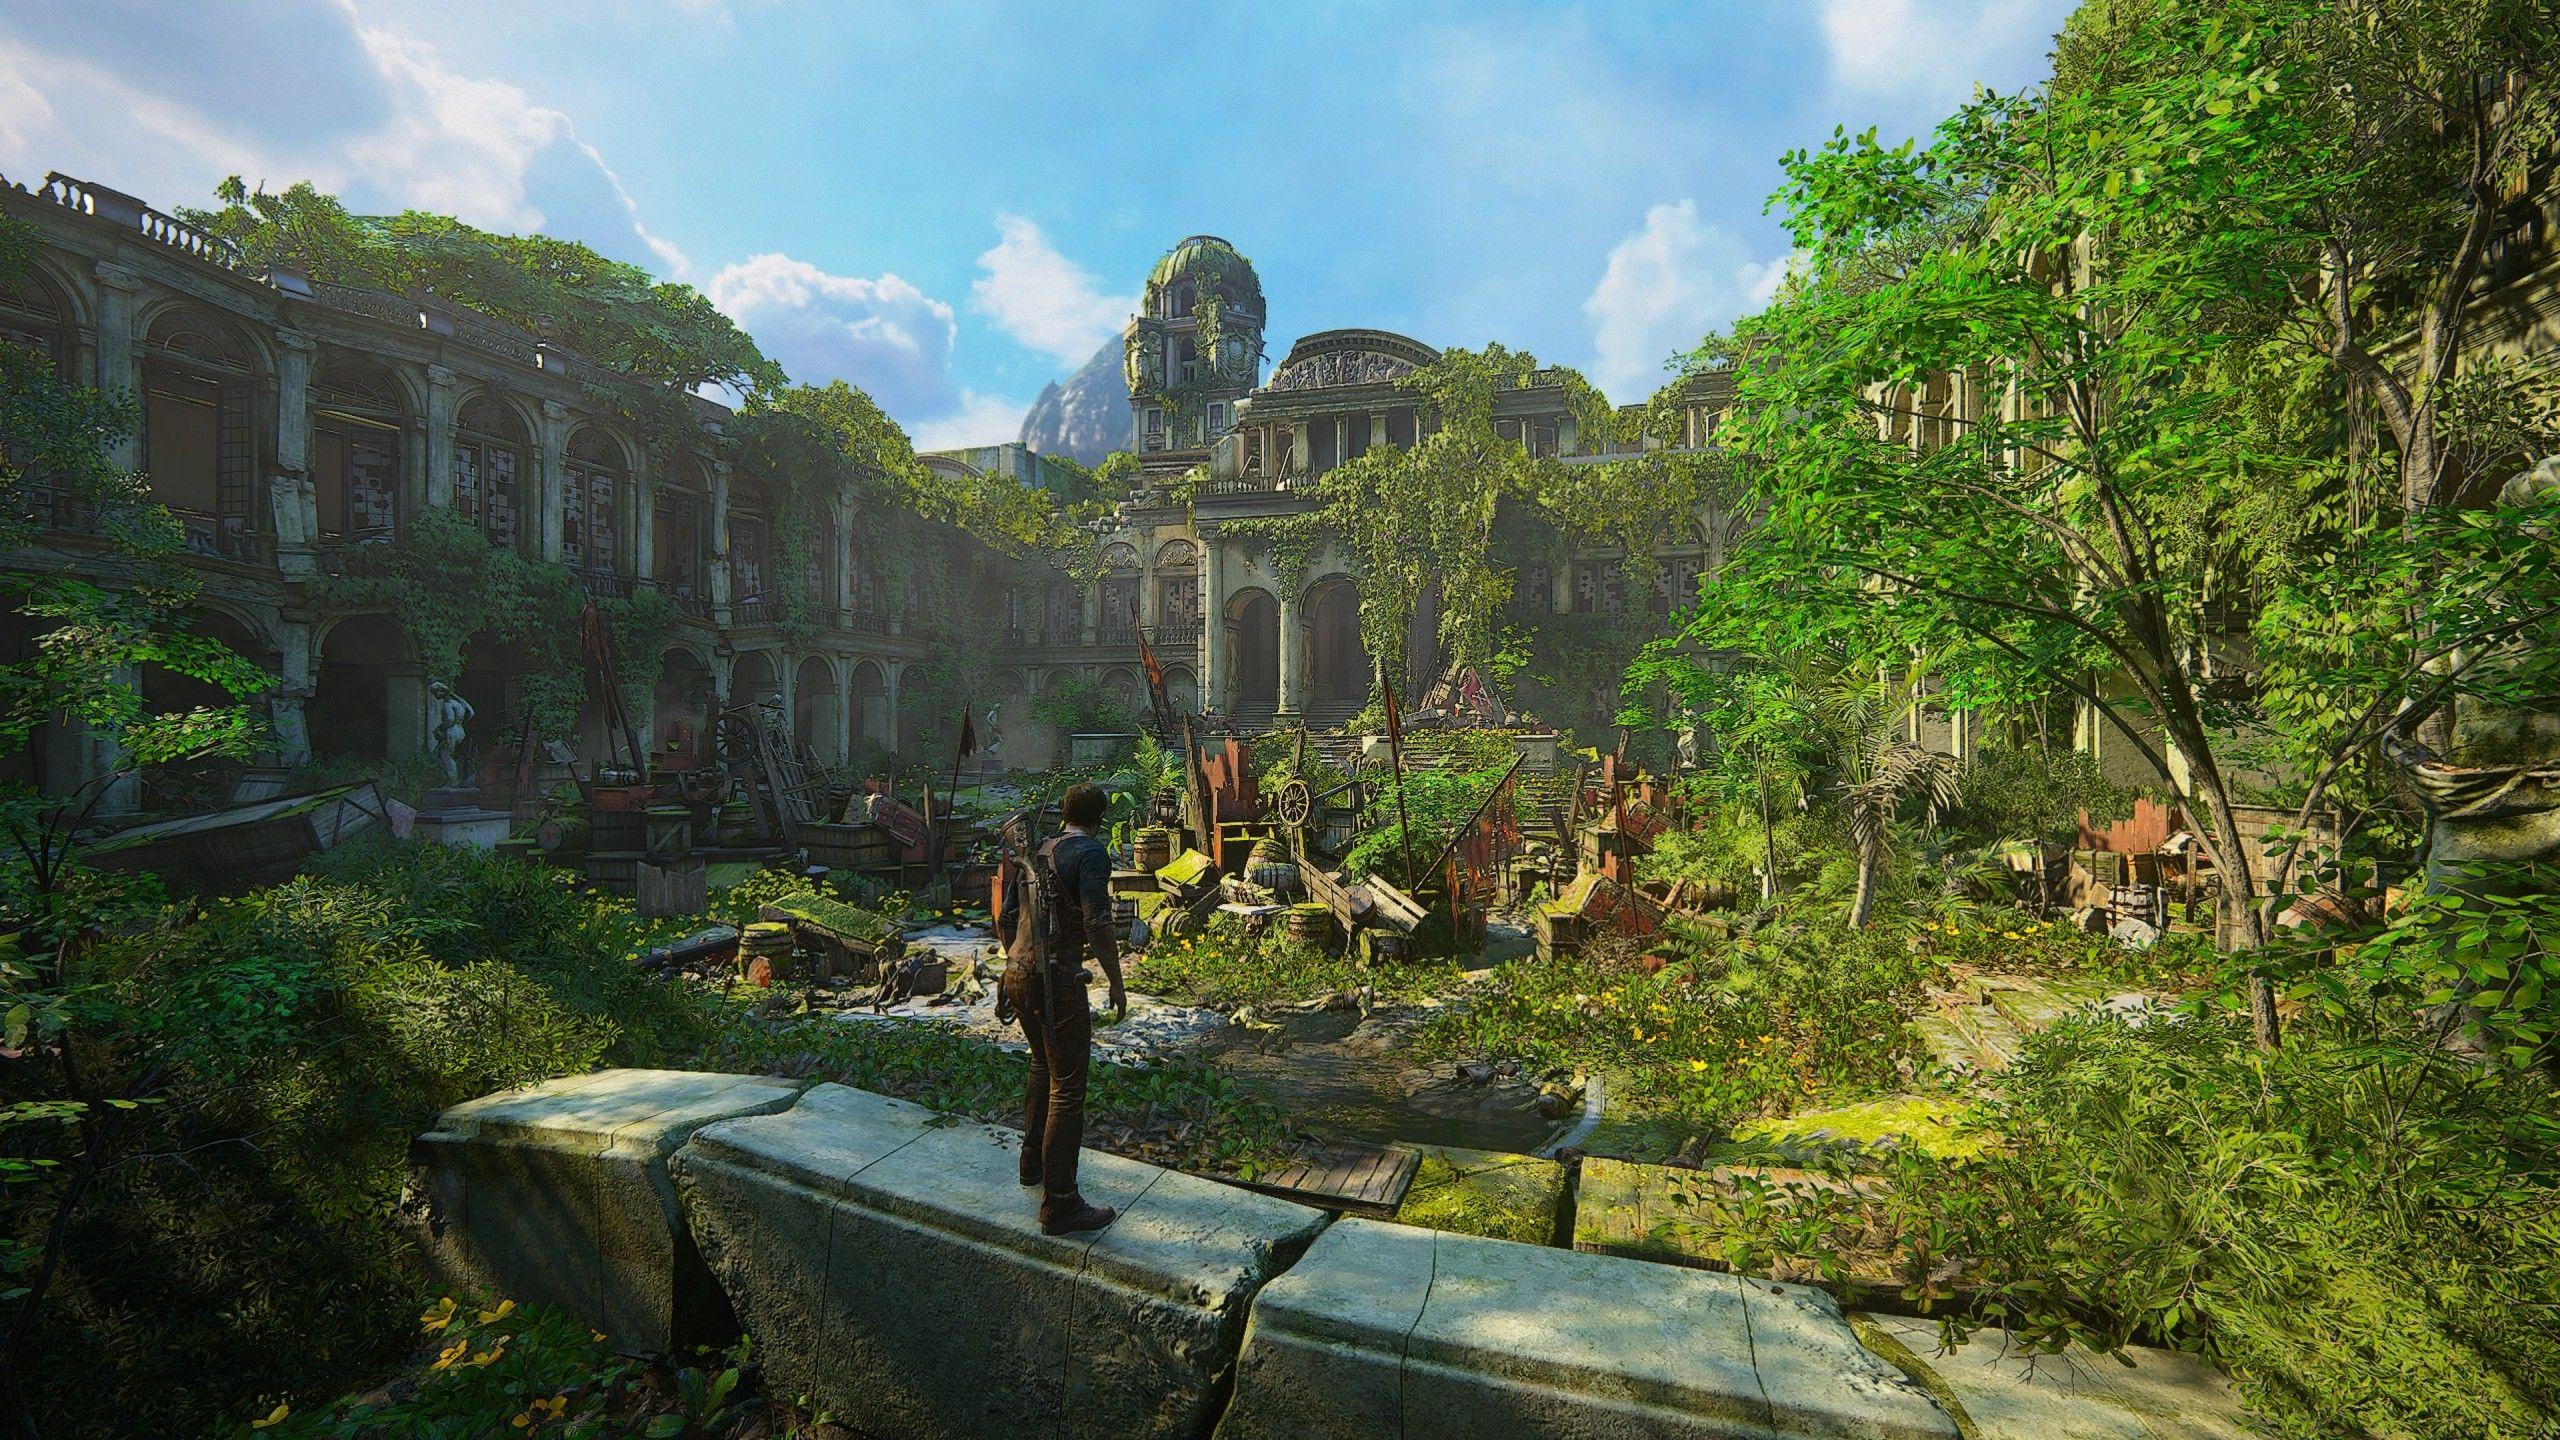 Download 2560x1440 Uncharted 4: A Thief's End, Ruins, Green